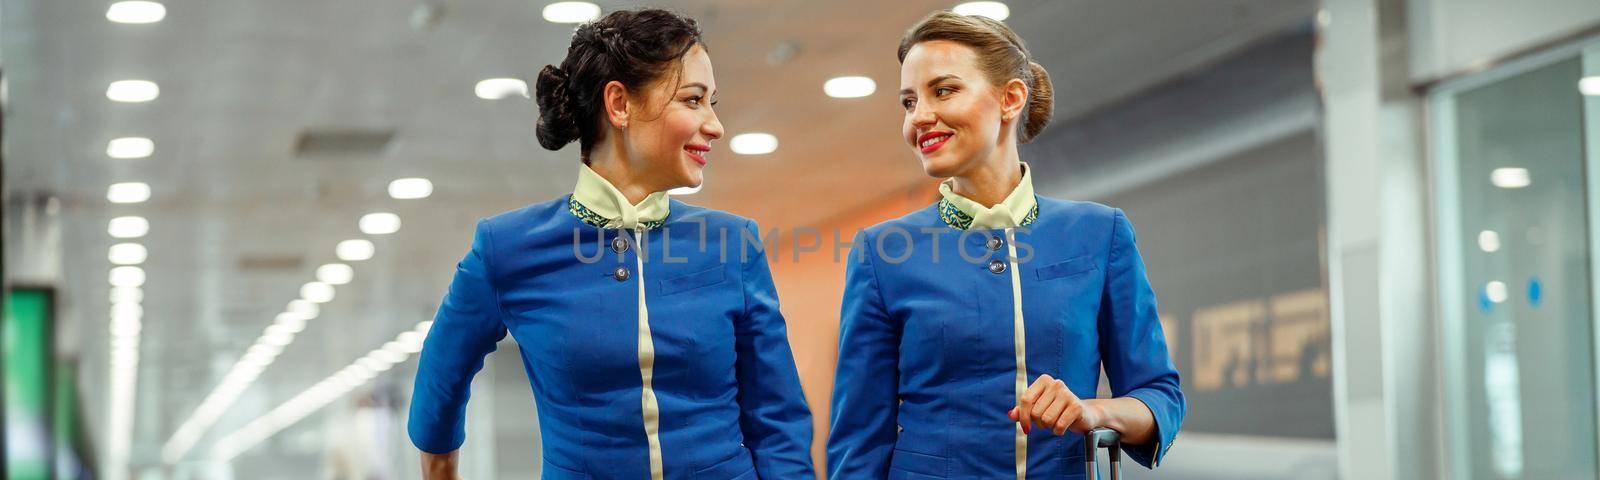 Cheerful stewardess with travel bags standing in airport terminal by Yaroslav_astakhov